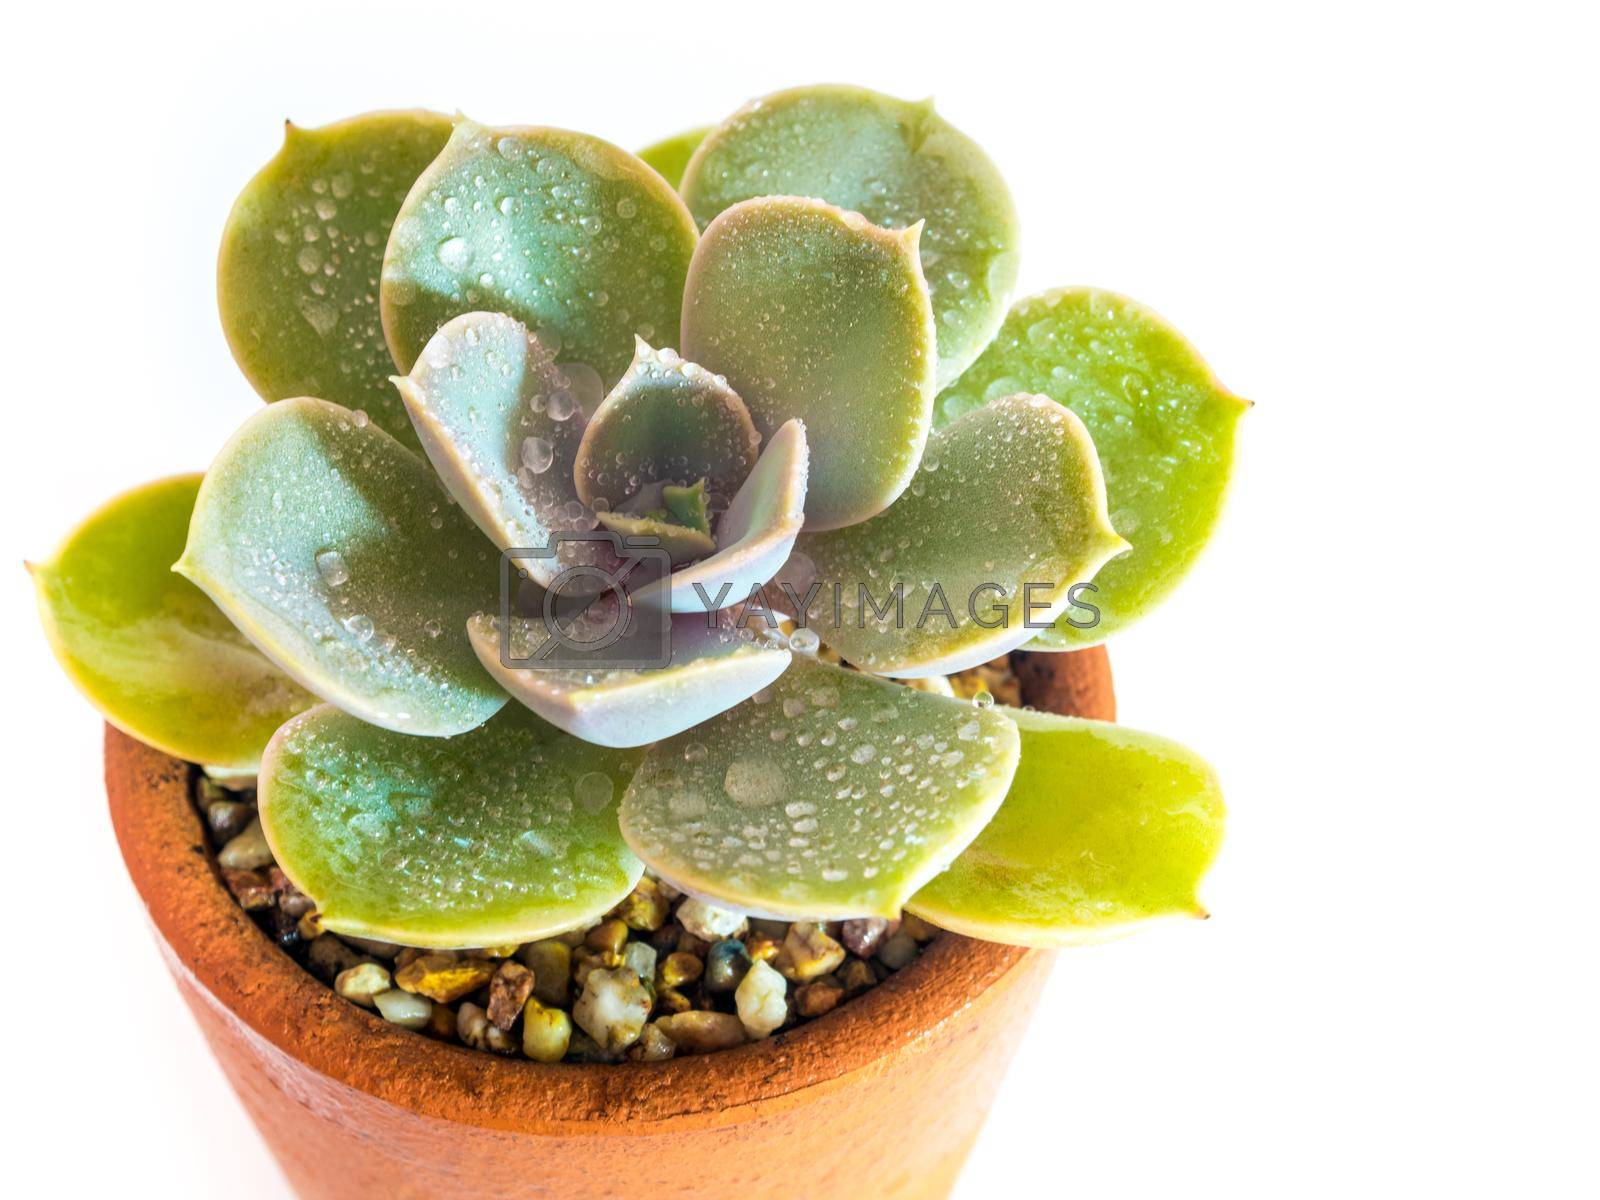 Royalty free image of Succulent plant close-up Echeveria plant in the earthen pot by Satakorn